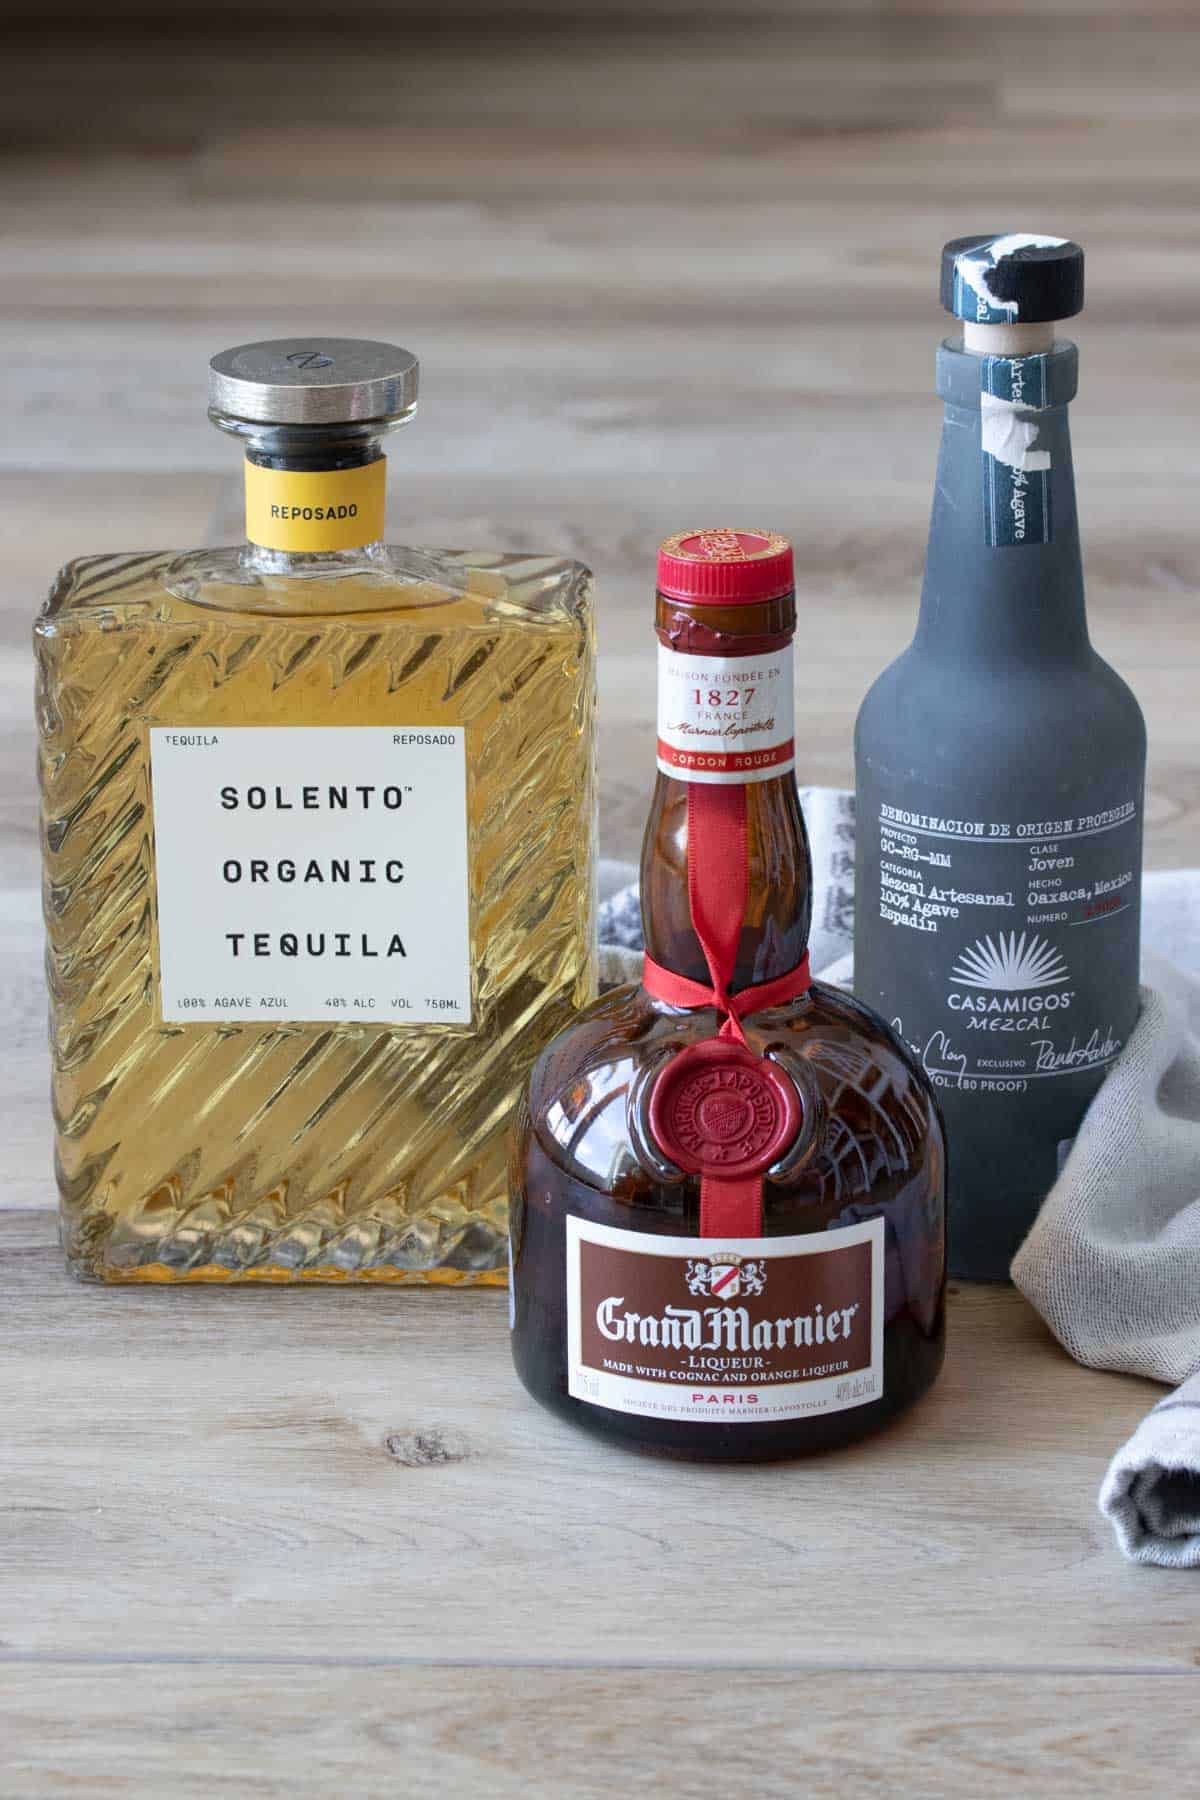 Three bottles of alcohol sitting on a wooden surface